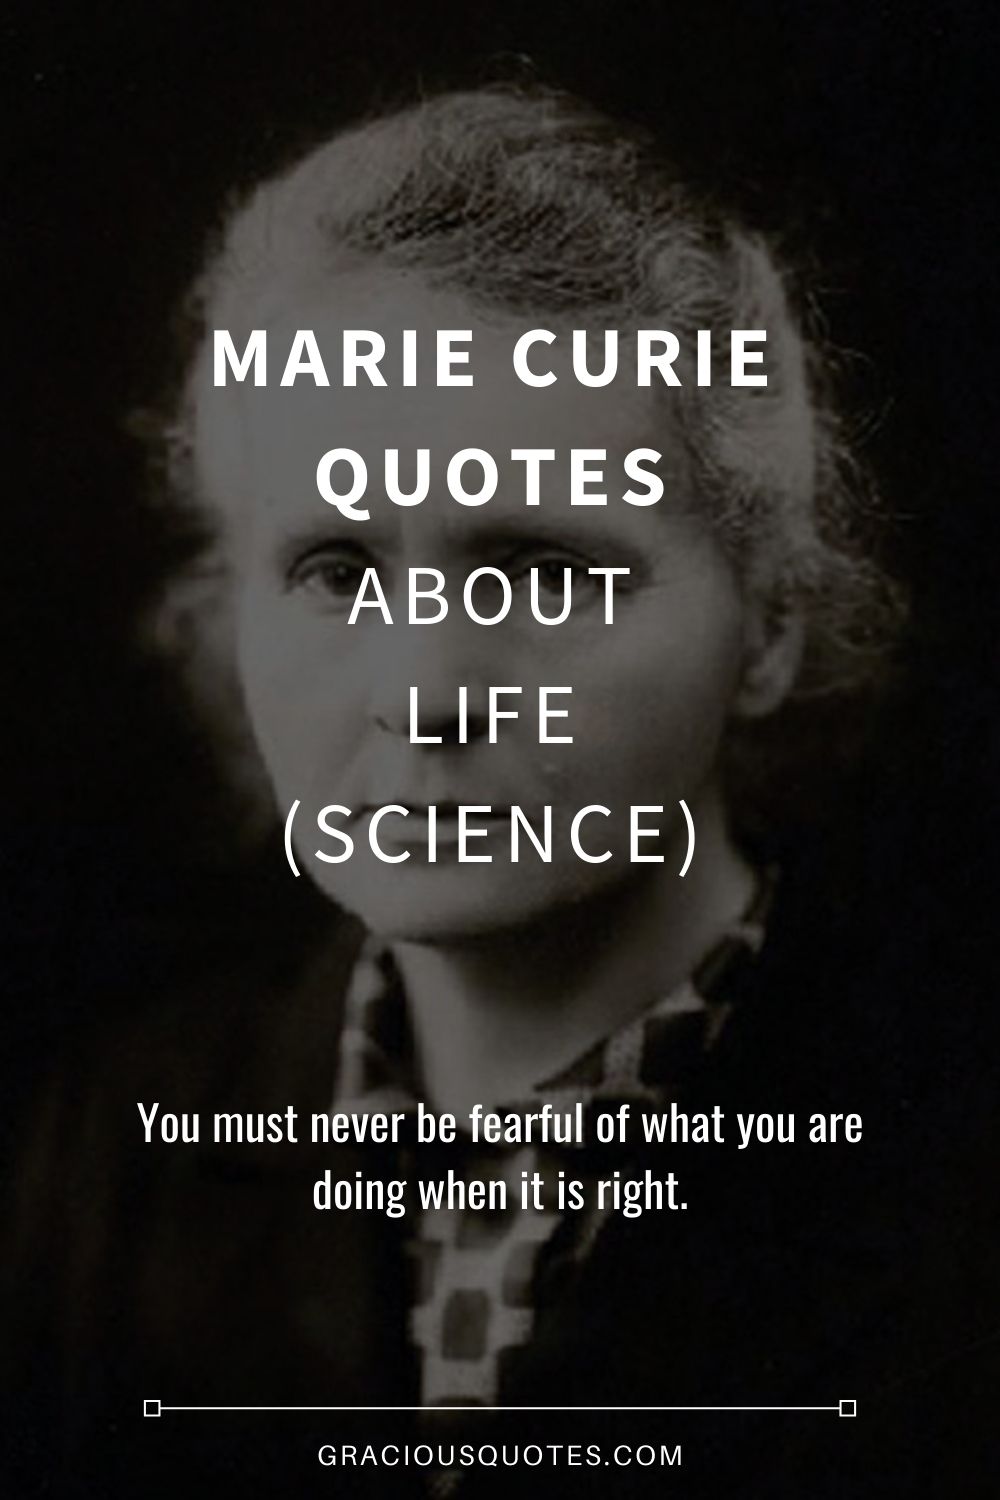 Marie Curie Quotes About Life (SCIENCE) - Gracious Quotes